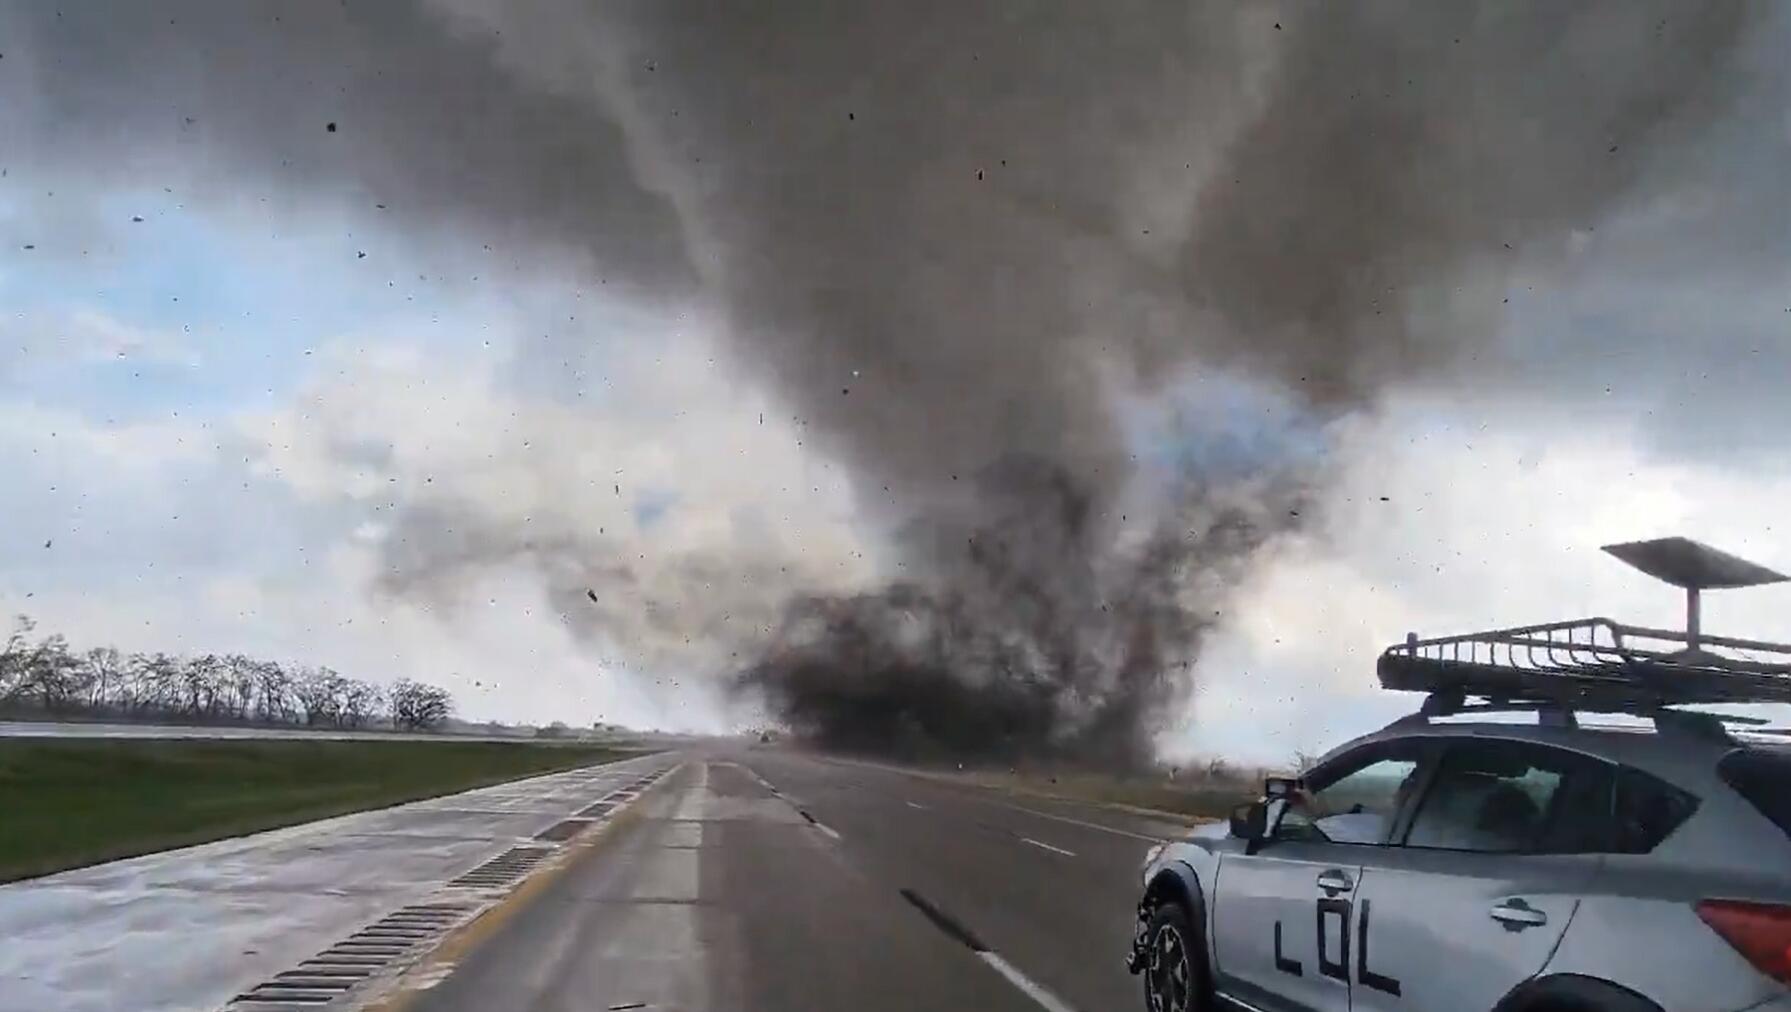 Check Out The Insane Footage of the Tornado in Nebraska and Iowa